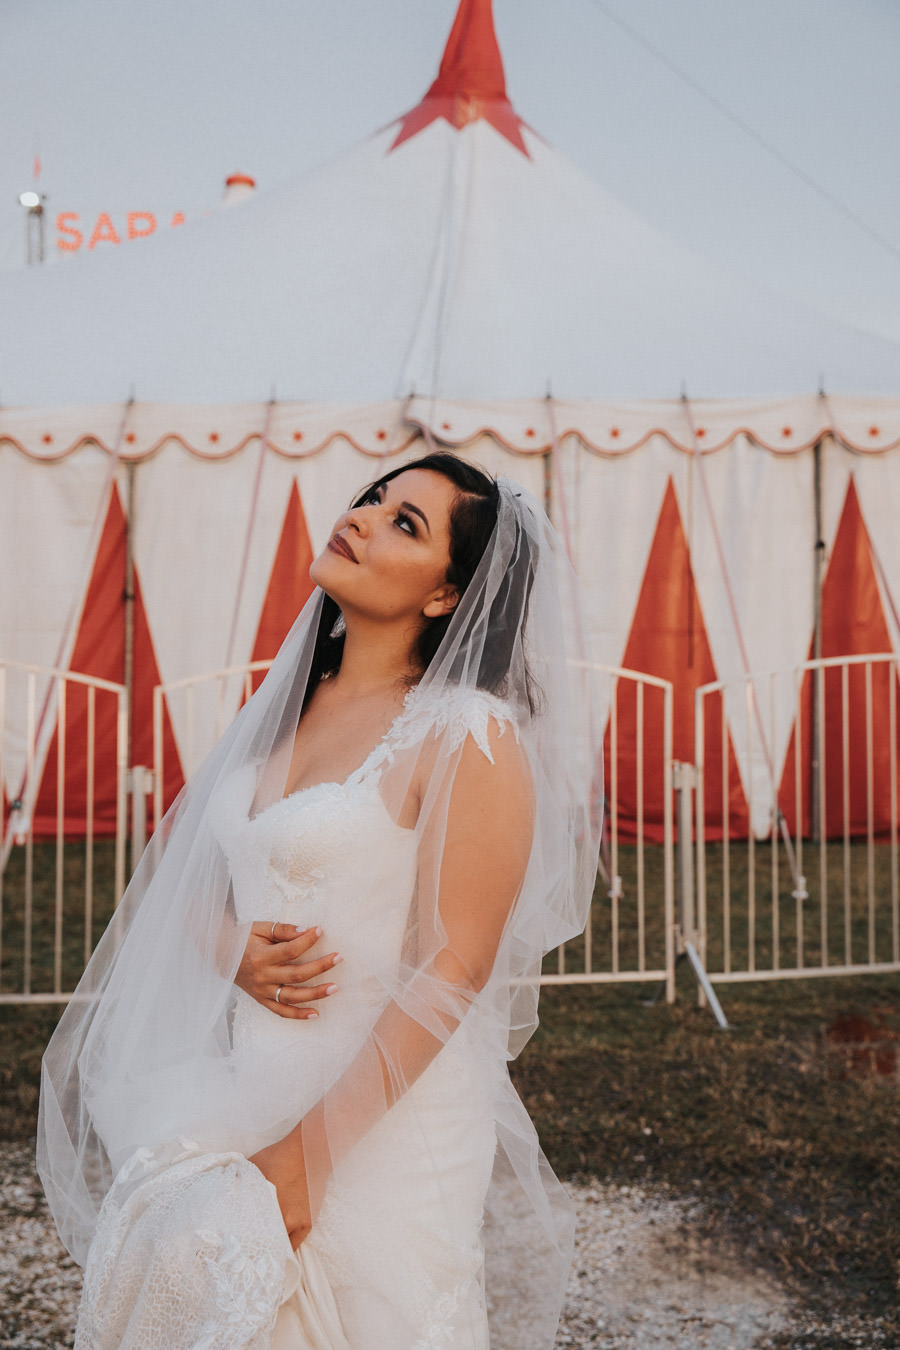 Florida Bride, in Romantic, White, Lace Isabella Talya Wedding Dress, Illusion Cap Sleeves, Sweetheart Neckline with Fitted Bodice, Unique Wedding Venue Circus Sarasota under the Big Top, The Ringling